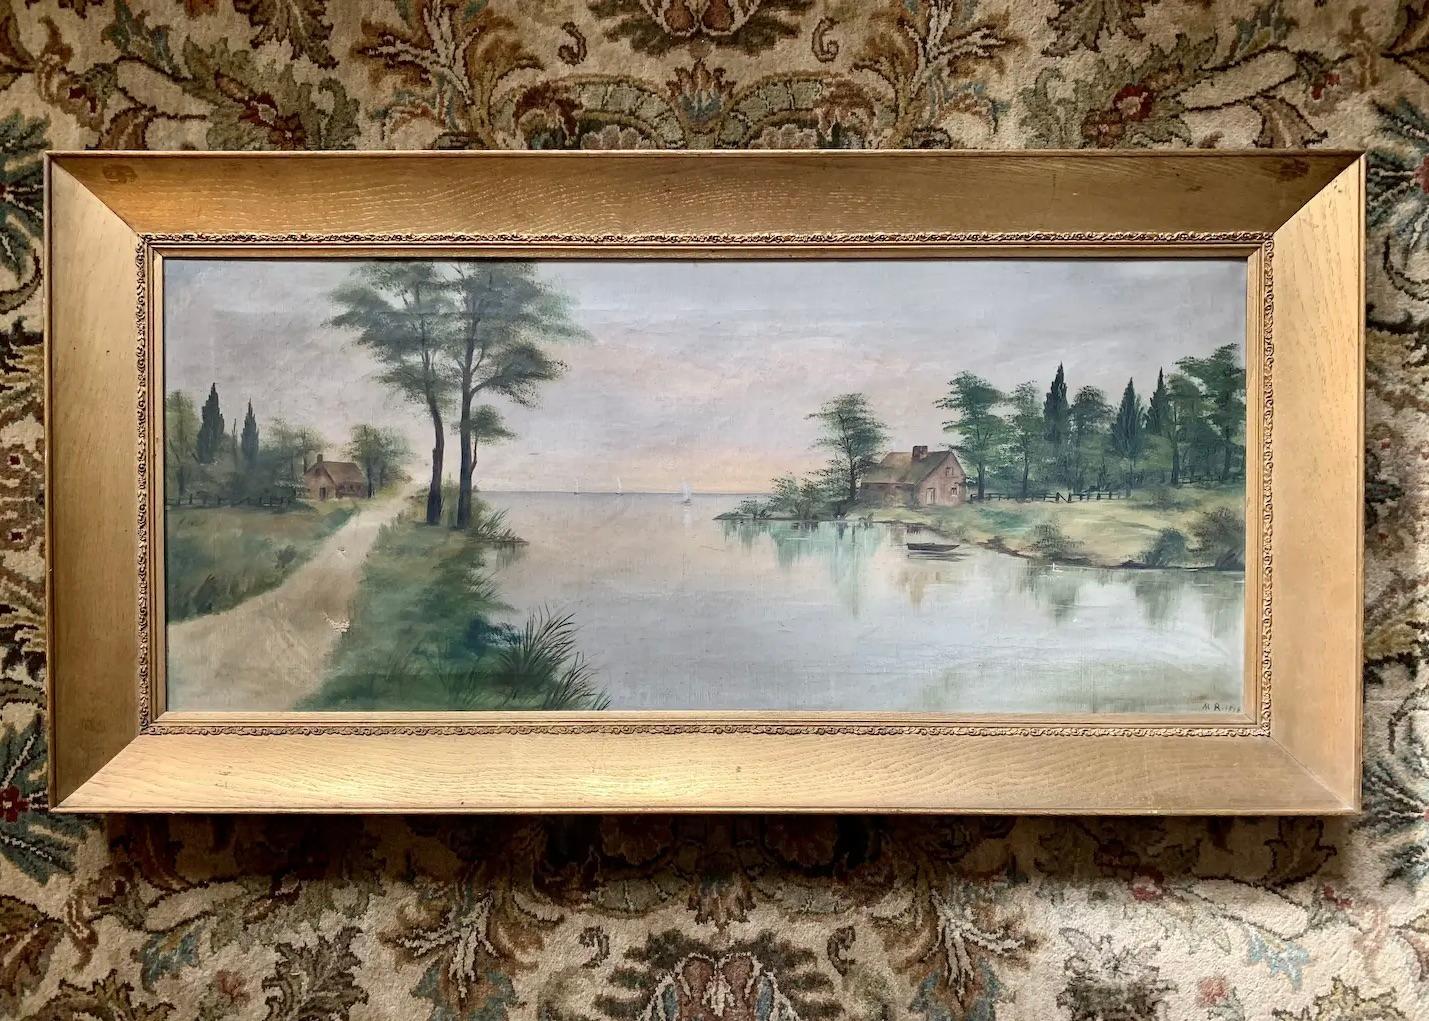 Offering a serene Dutch landscape, oil on canvas, signed M.R. 1818.

Soothing cottage retreat on the water in earthy tones compliments various styles and color schemes. 

Showcased in solid wood frame of the period. Ready to hang.

Artwork is in